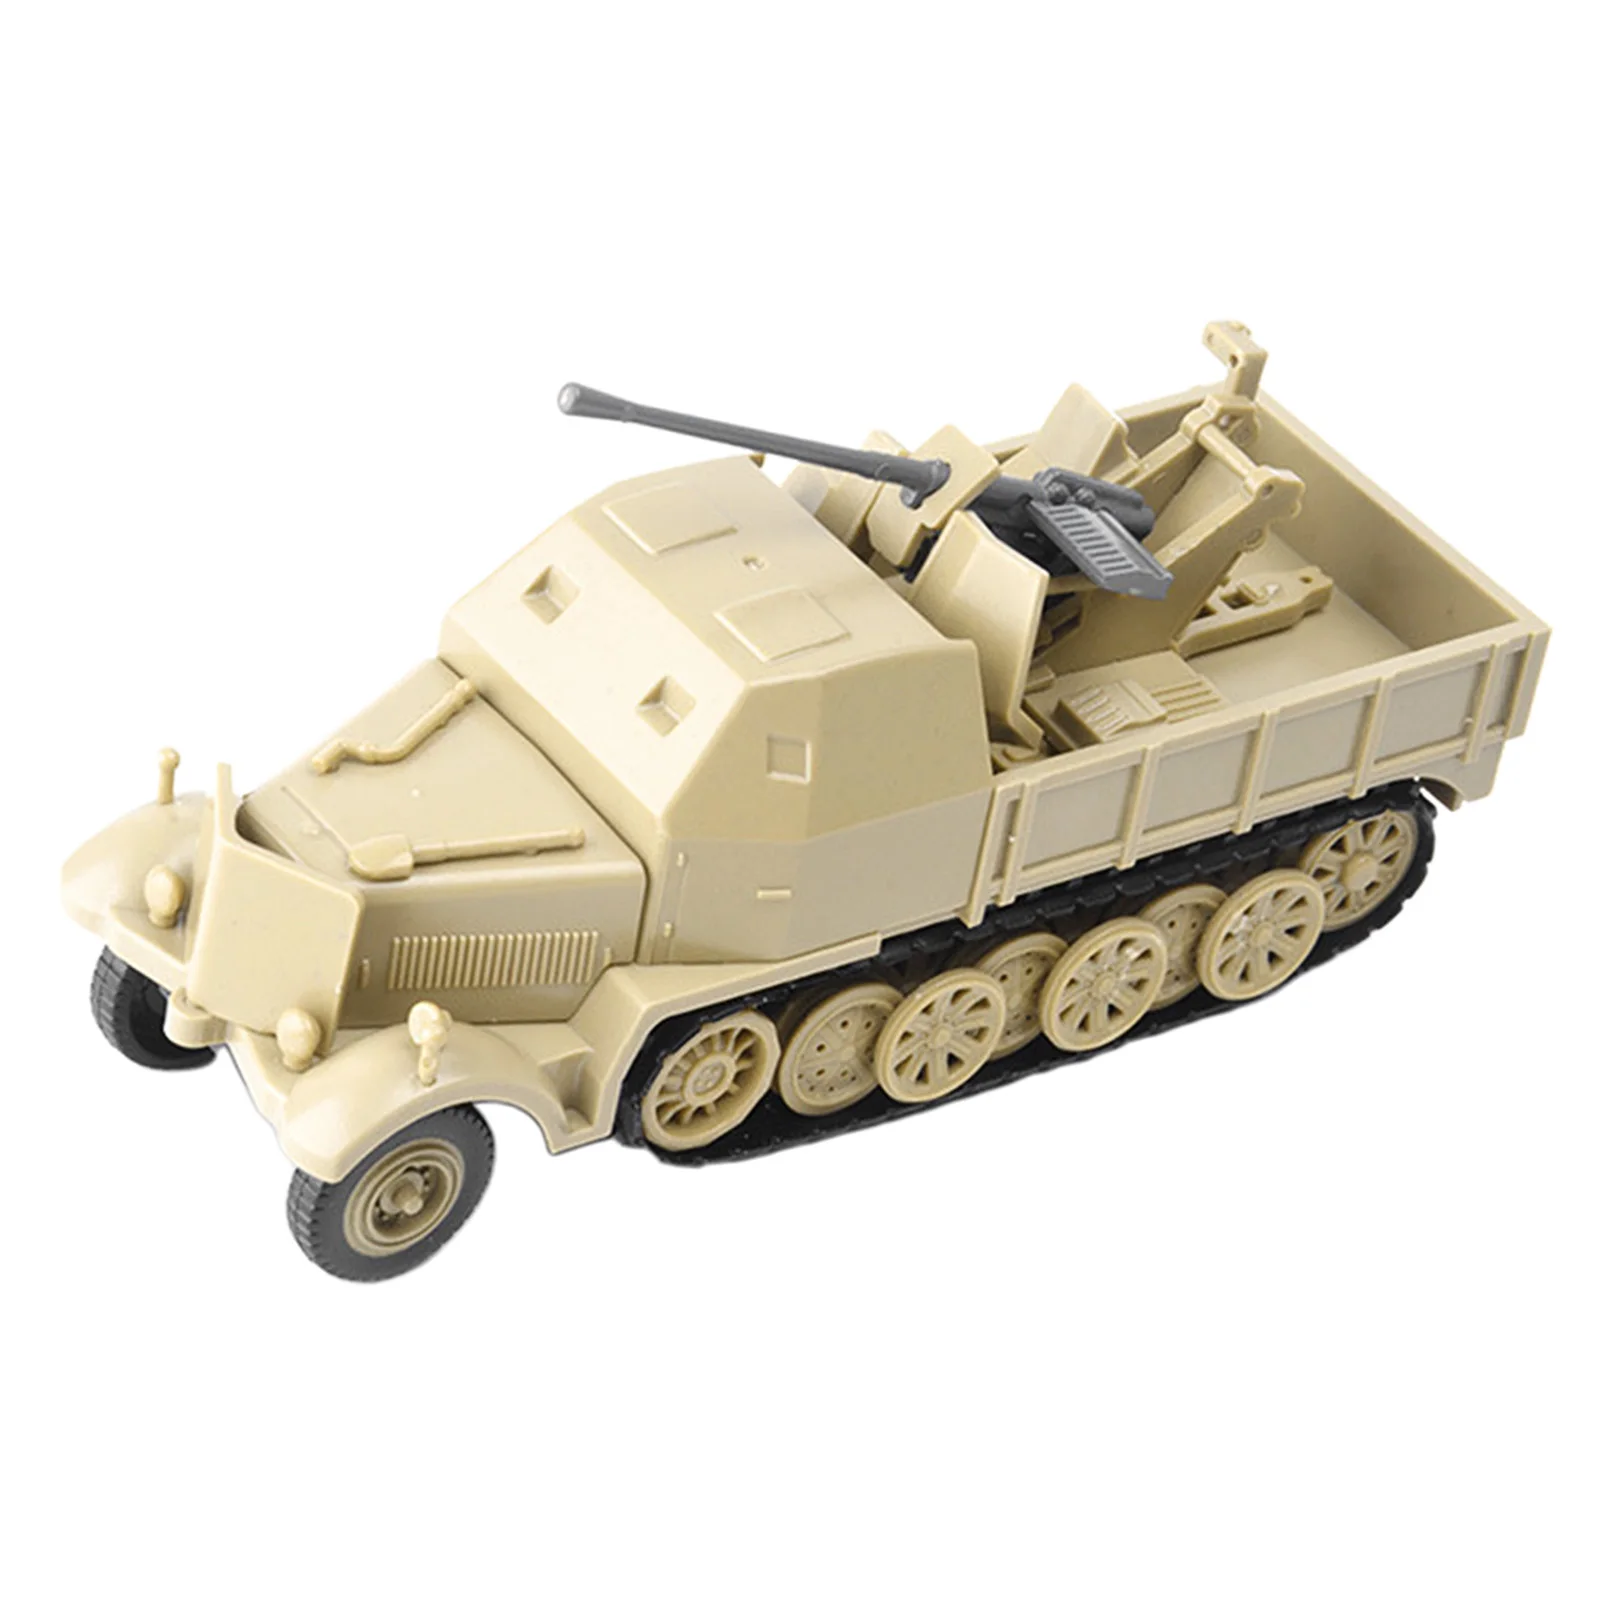 Details about   1:72 Half Track Armored Vehicle Model Toys DIY Vehicle Static Display Model 